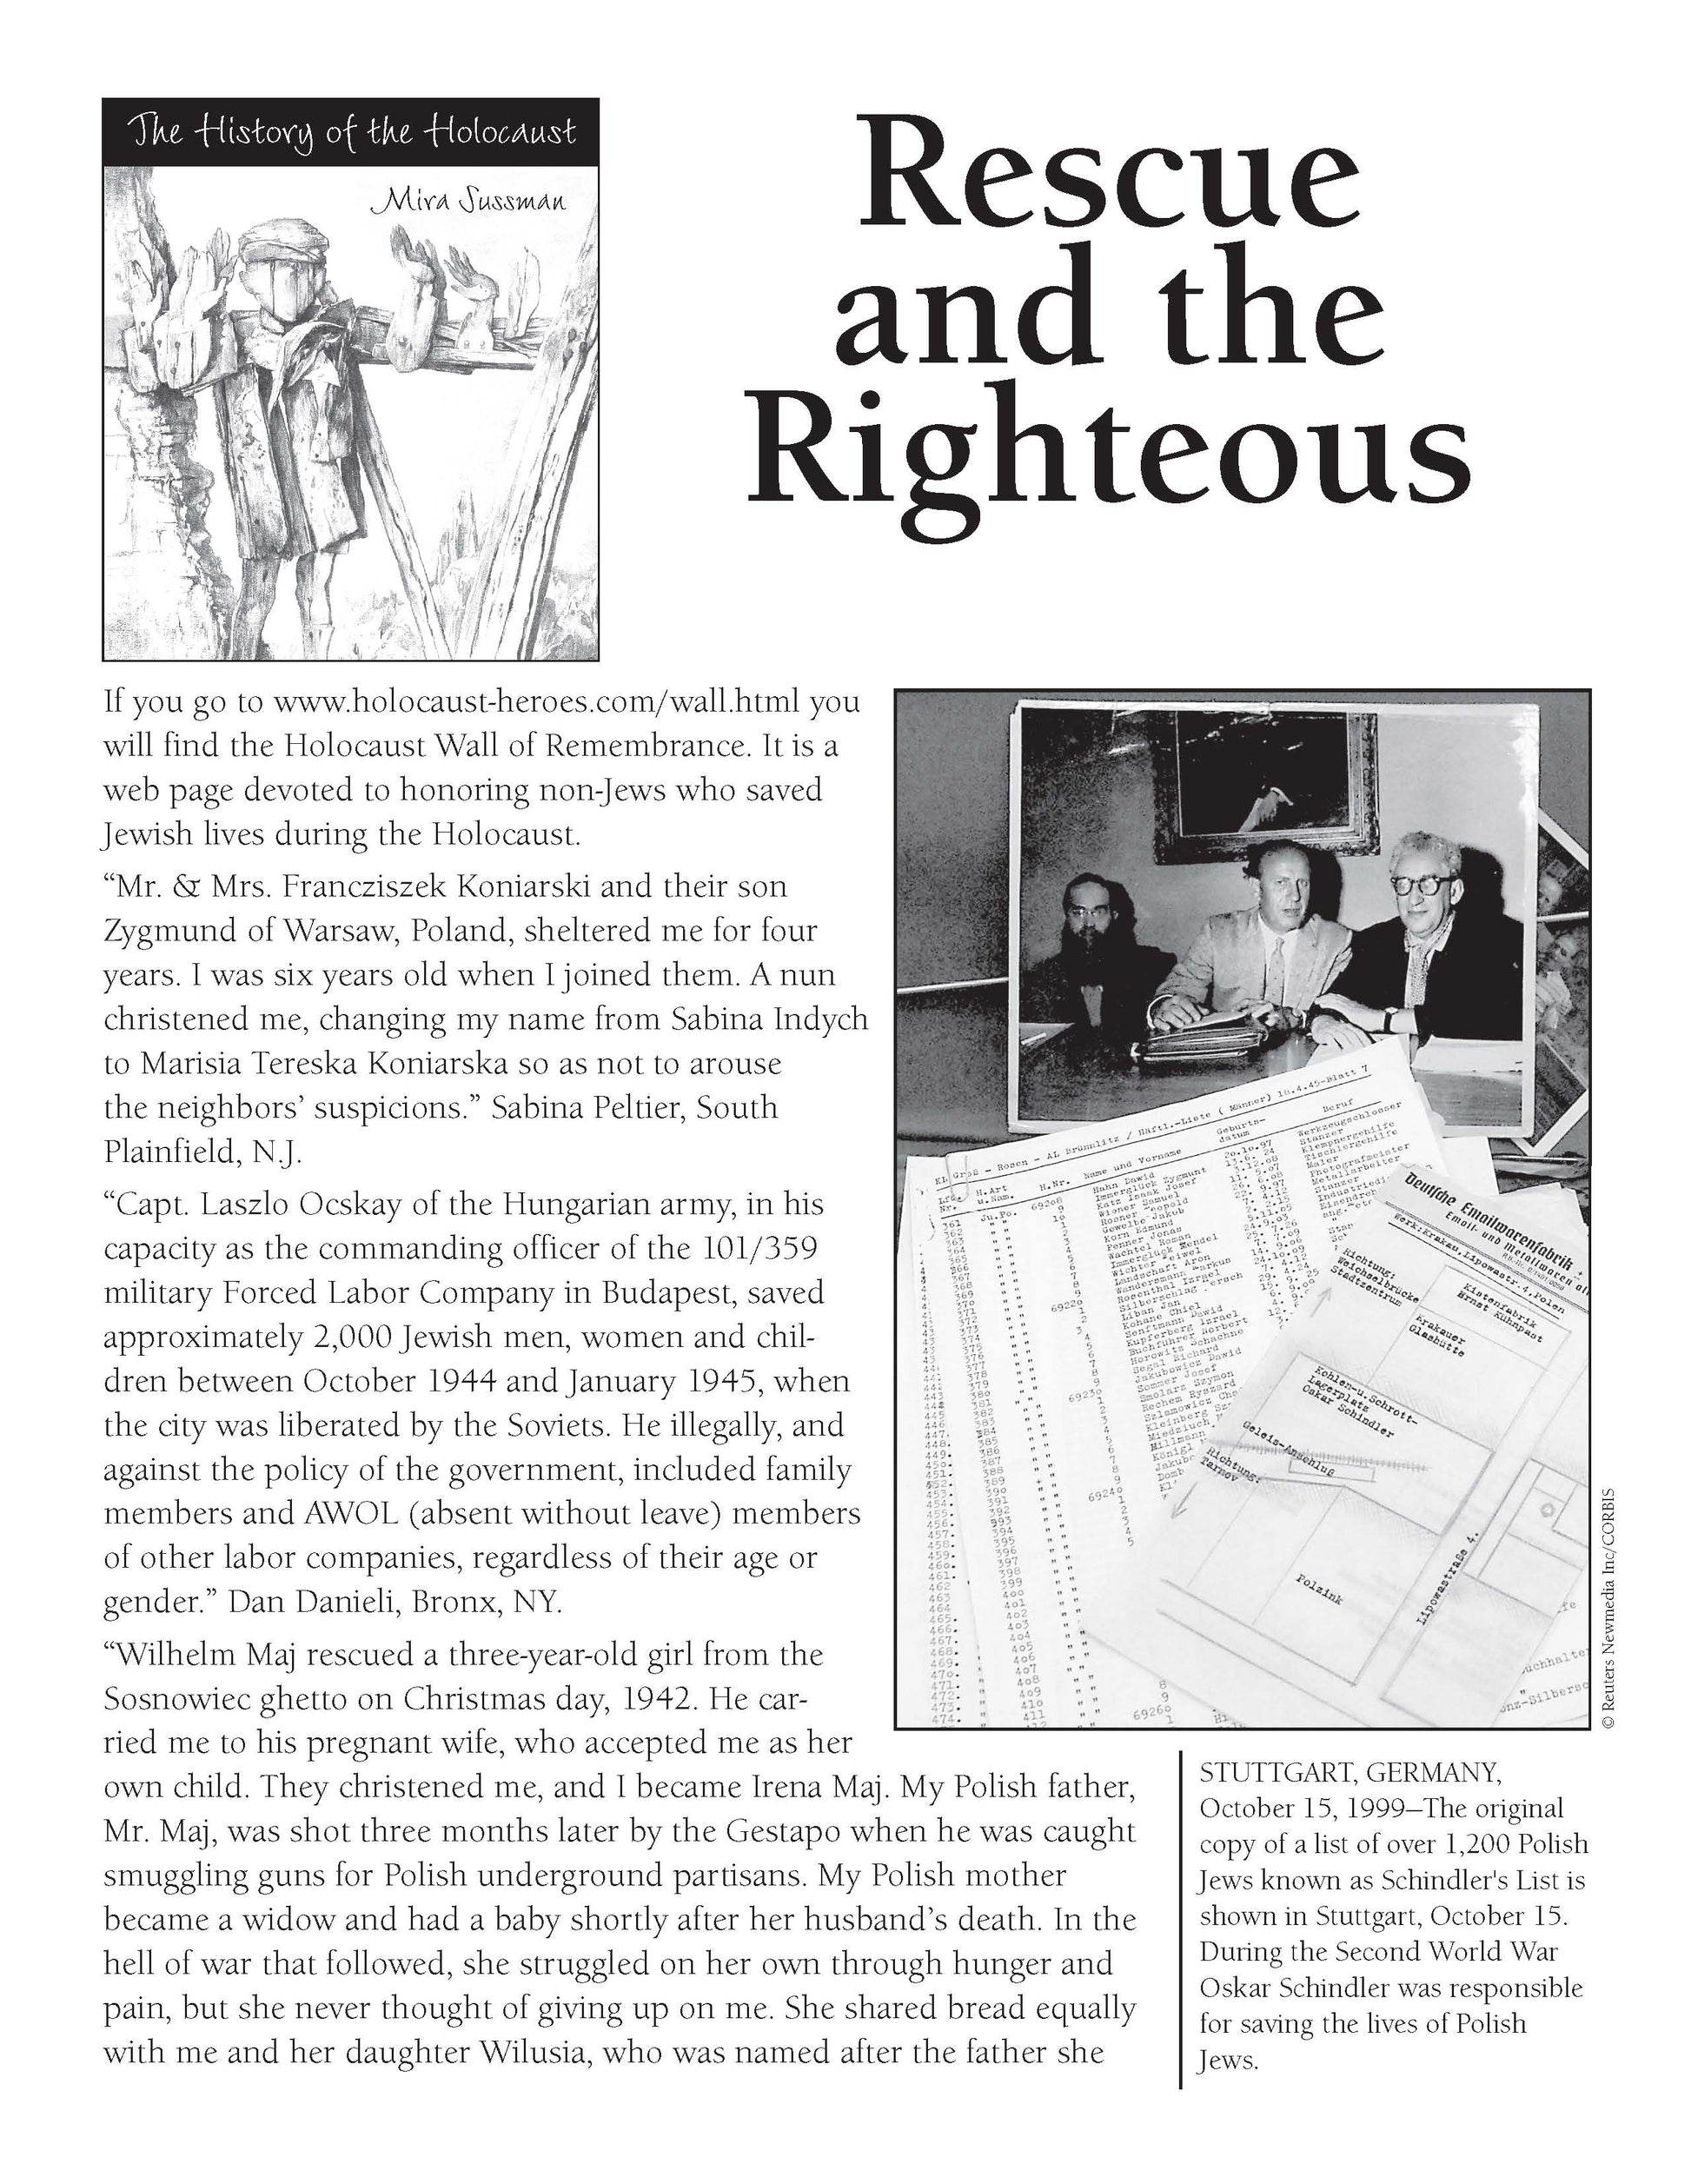 History of the Holocaust: Rescue and the Righteous